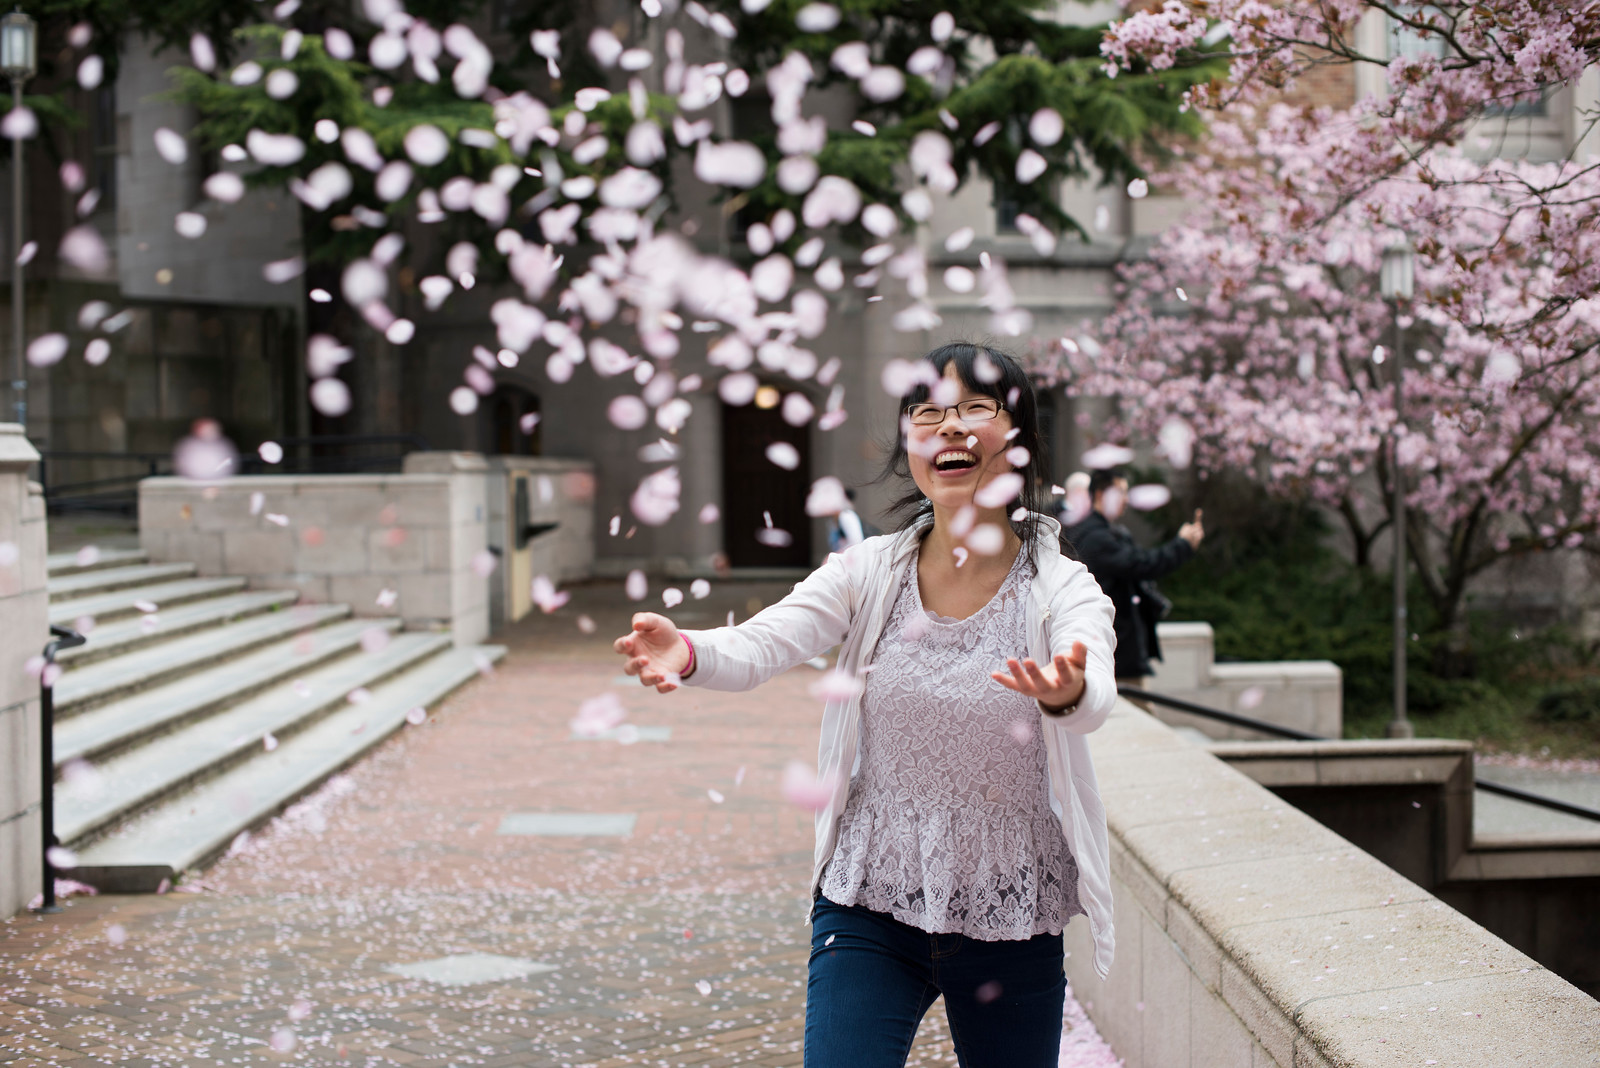 Student throwing cherry blossom petals in air